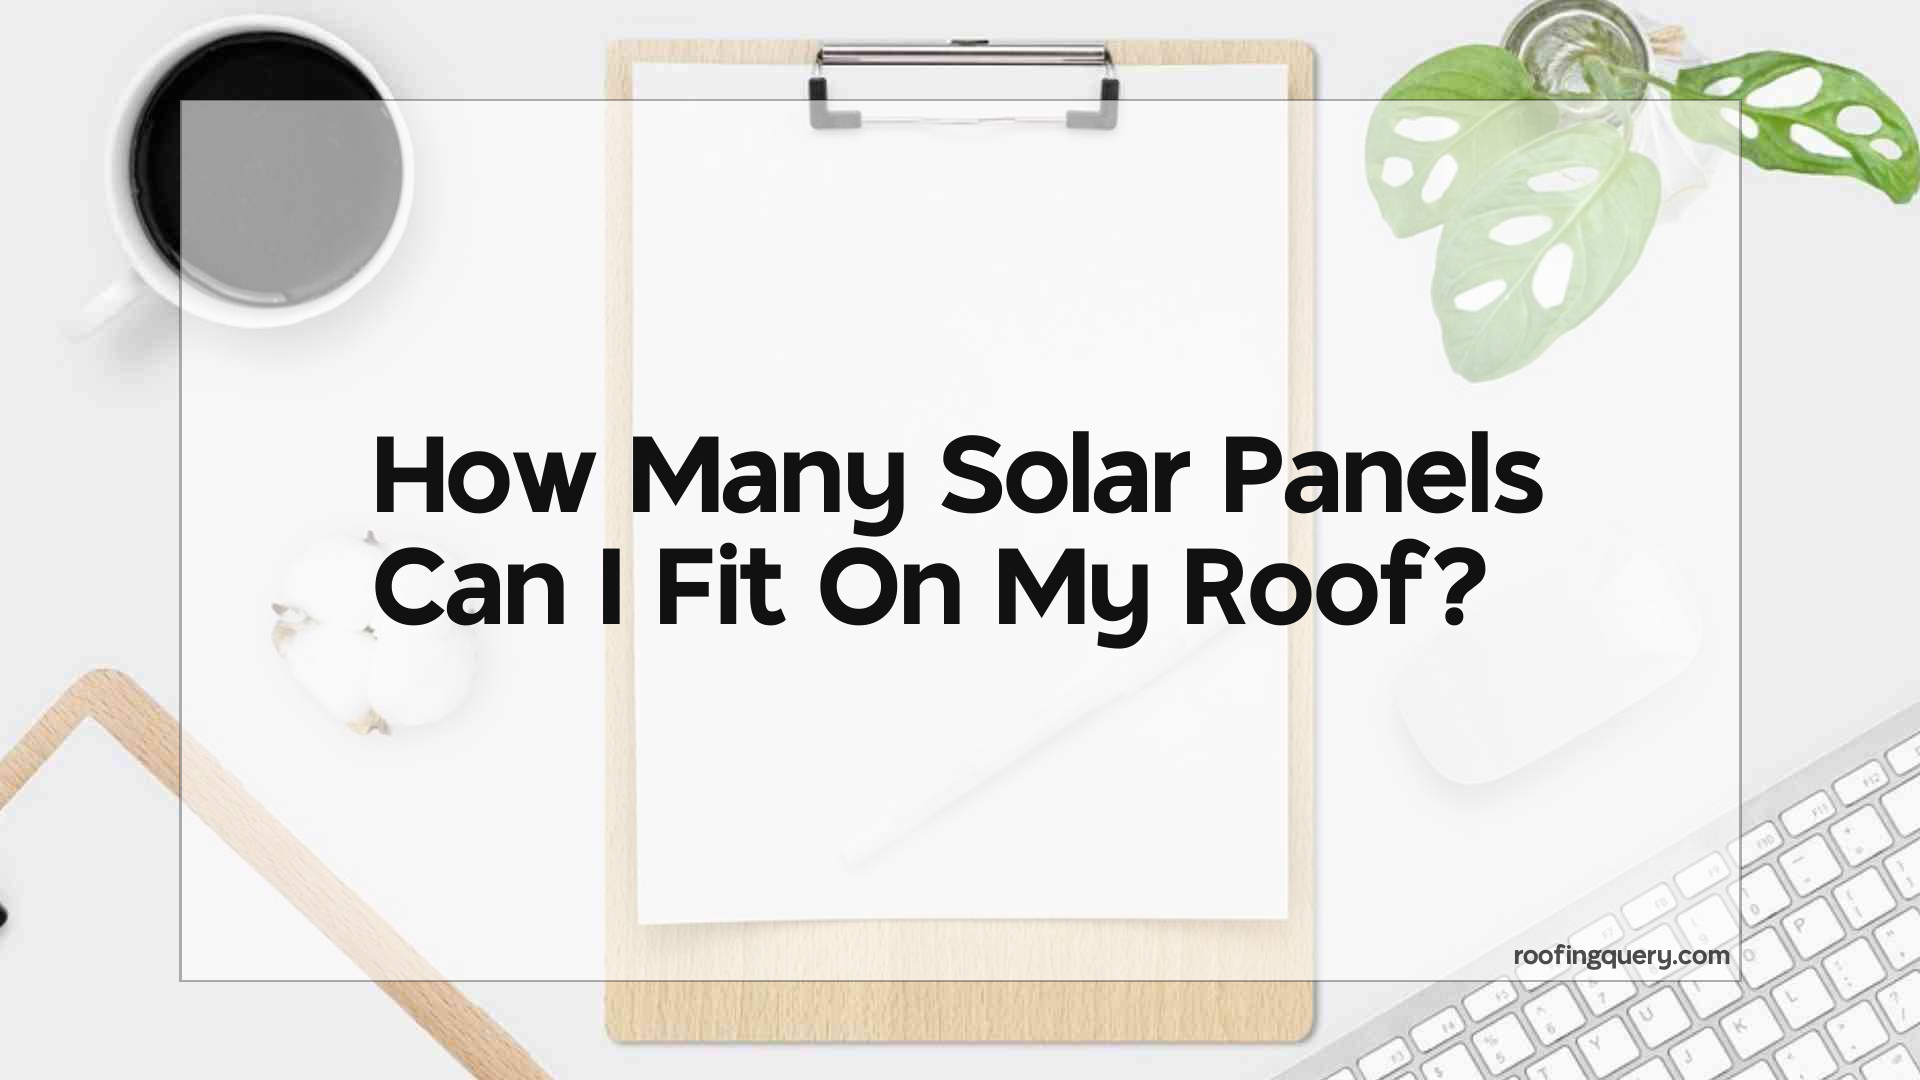 How Many Solar Panels Can I Fit On My Roof